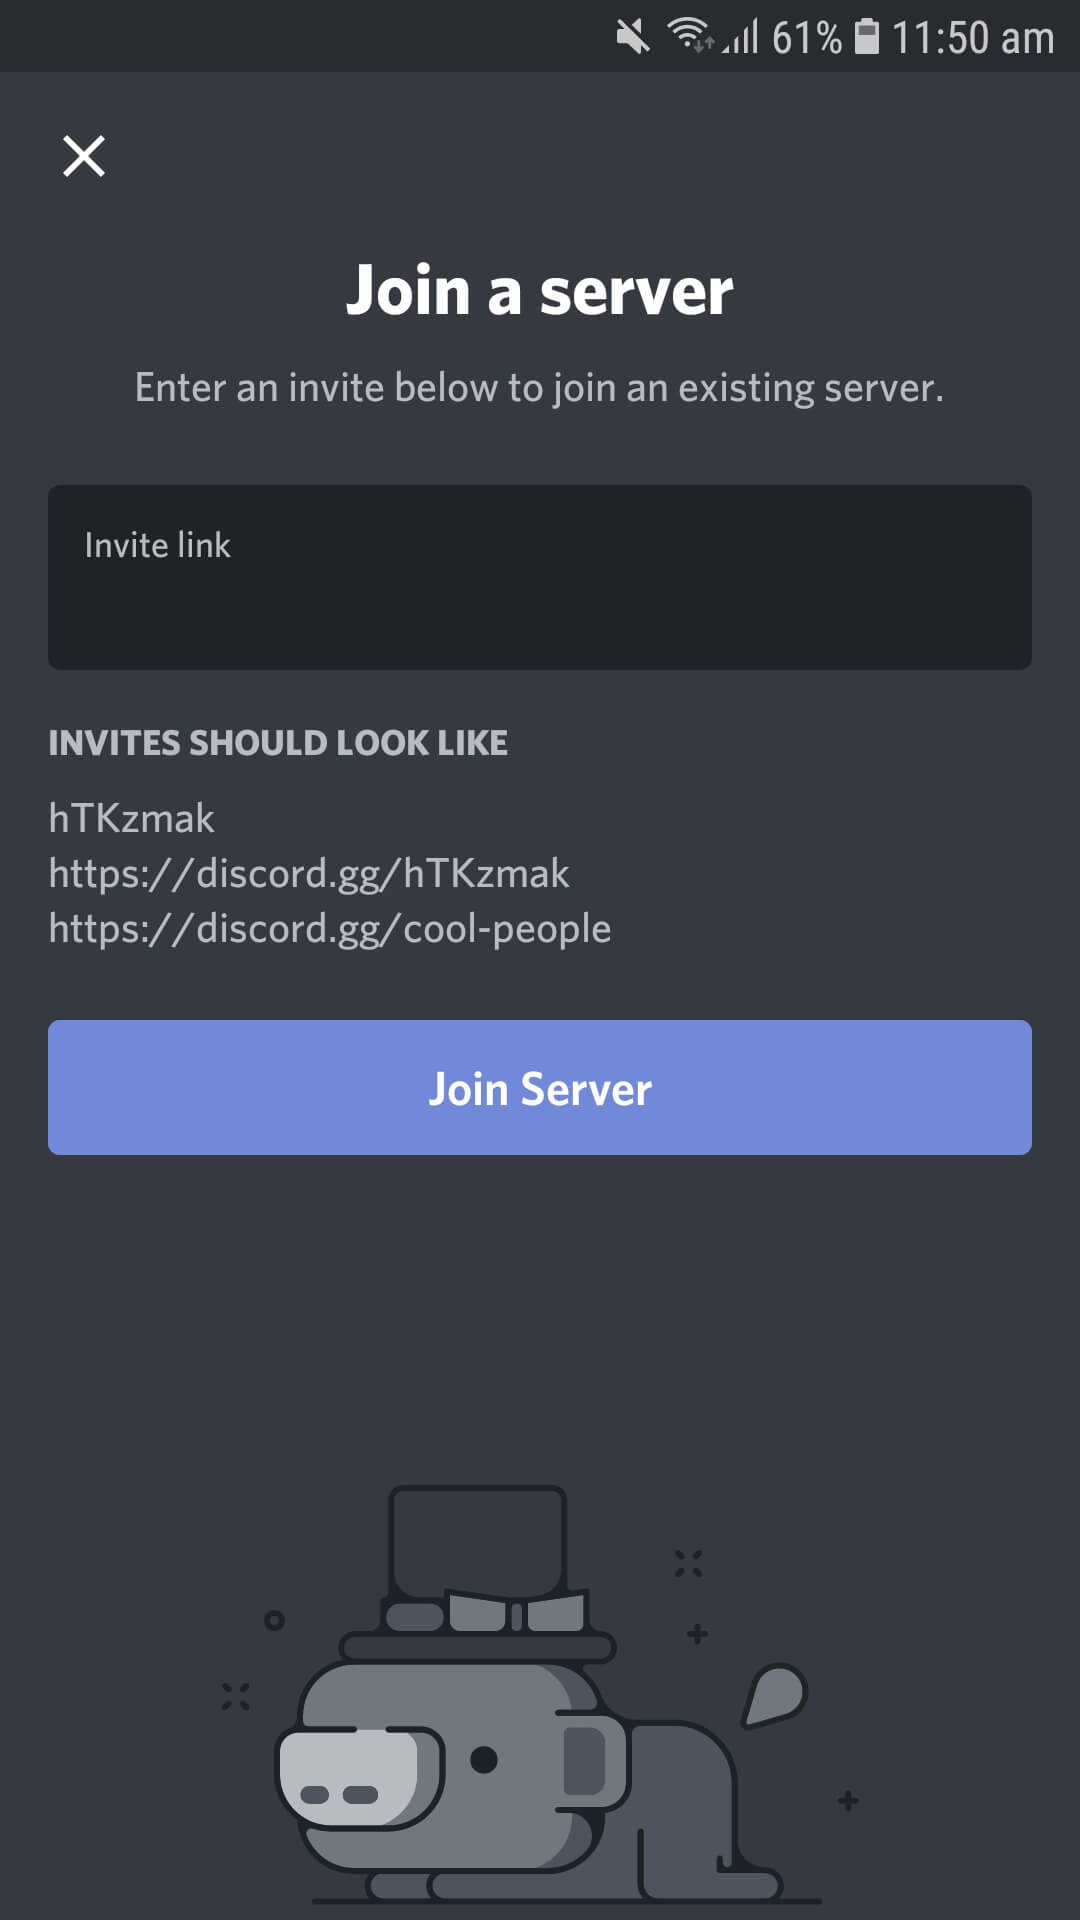 Join a chat server of any kind